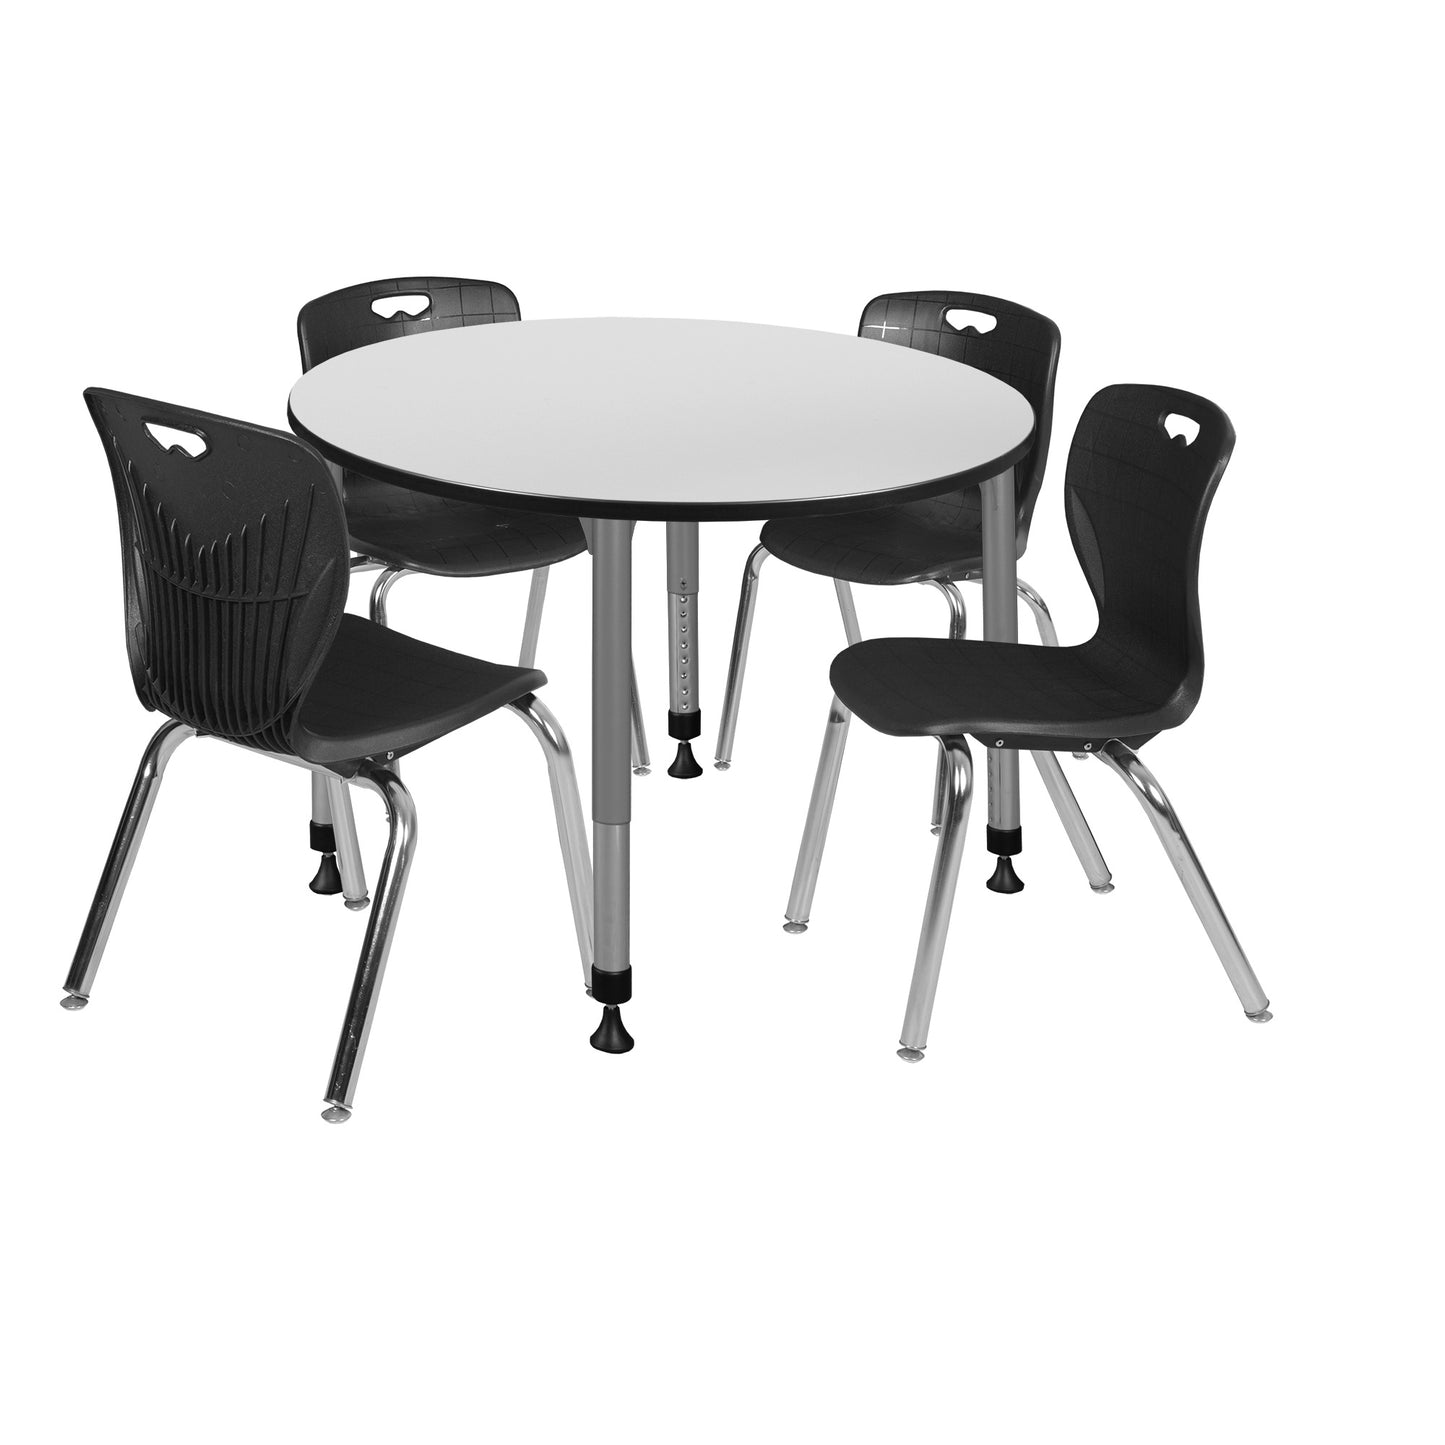 Regency Kee 48 in. Round Adjustable Classroom Table & 4 Andy 18 in. Stack Chairs